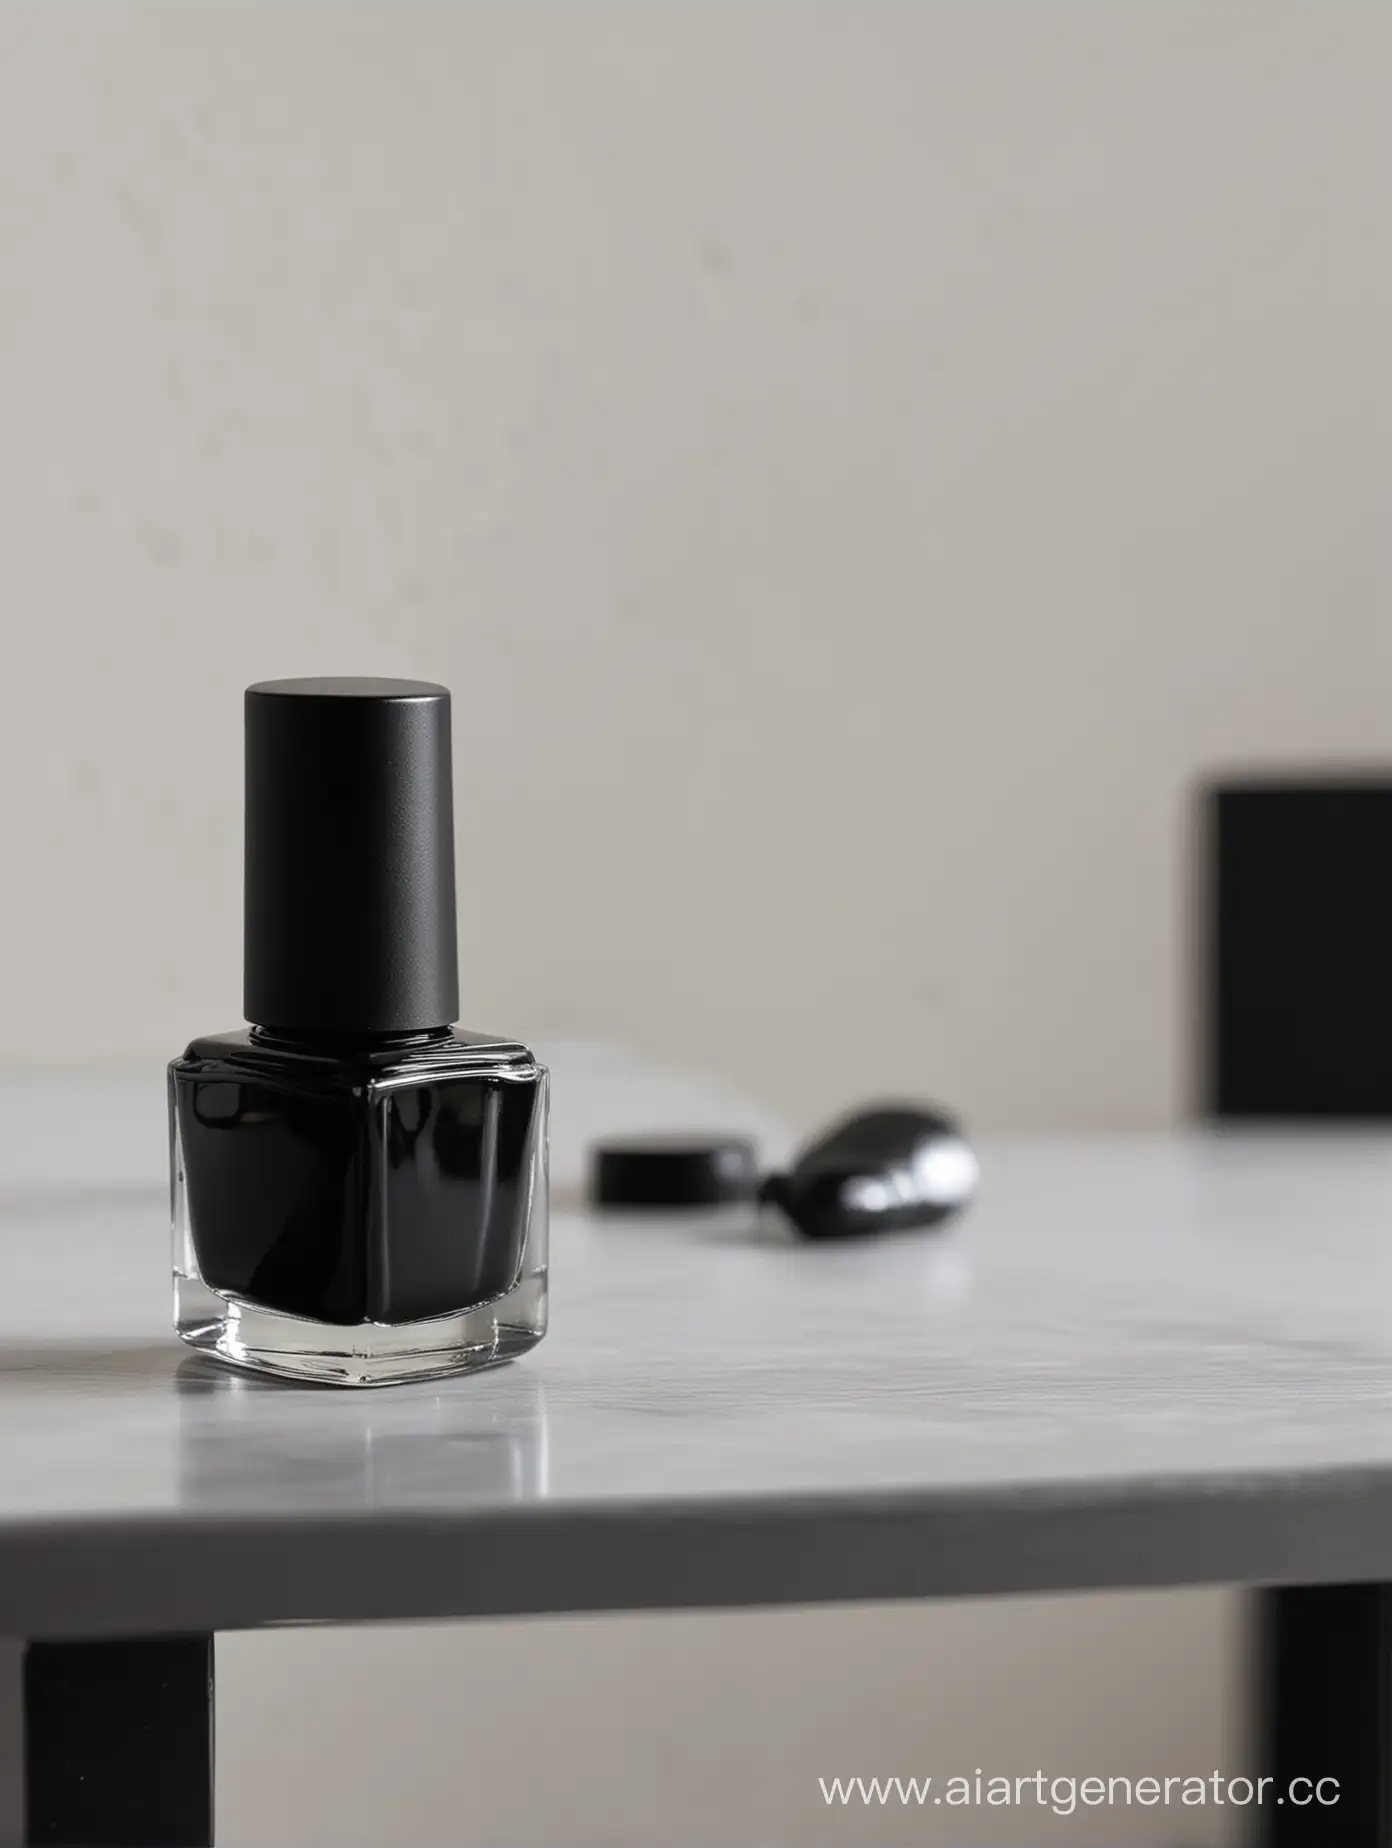 One black nail polish is on the table. There is a light wall on the background.